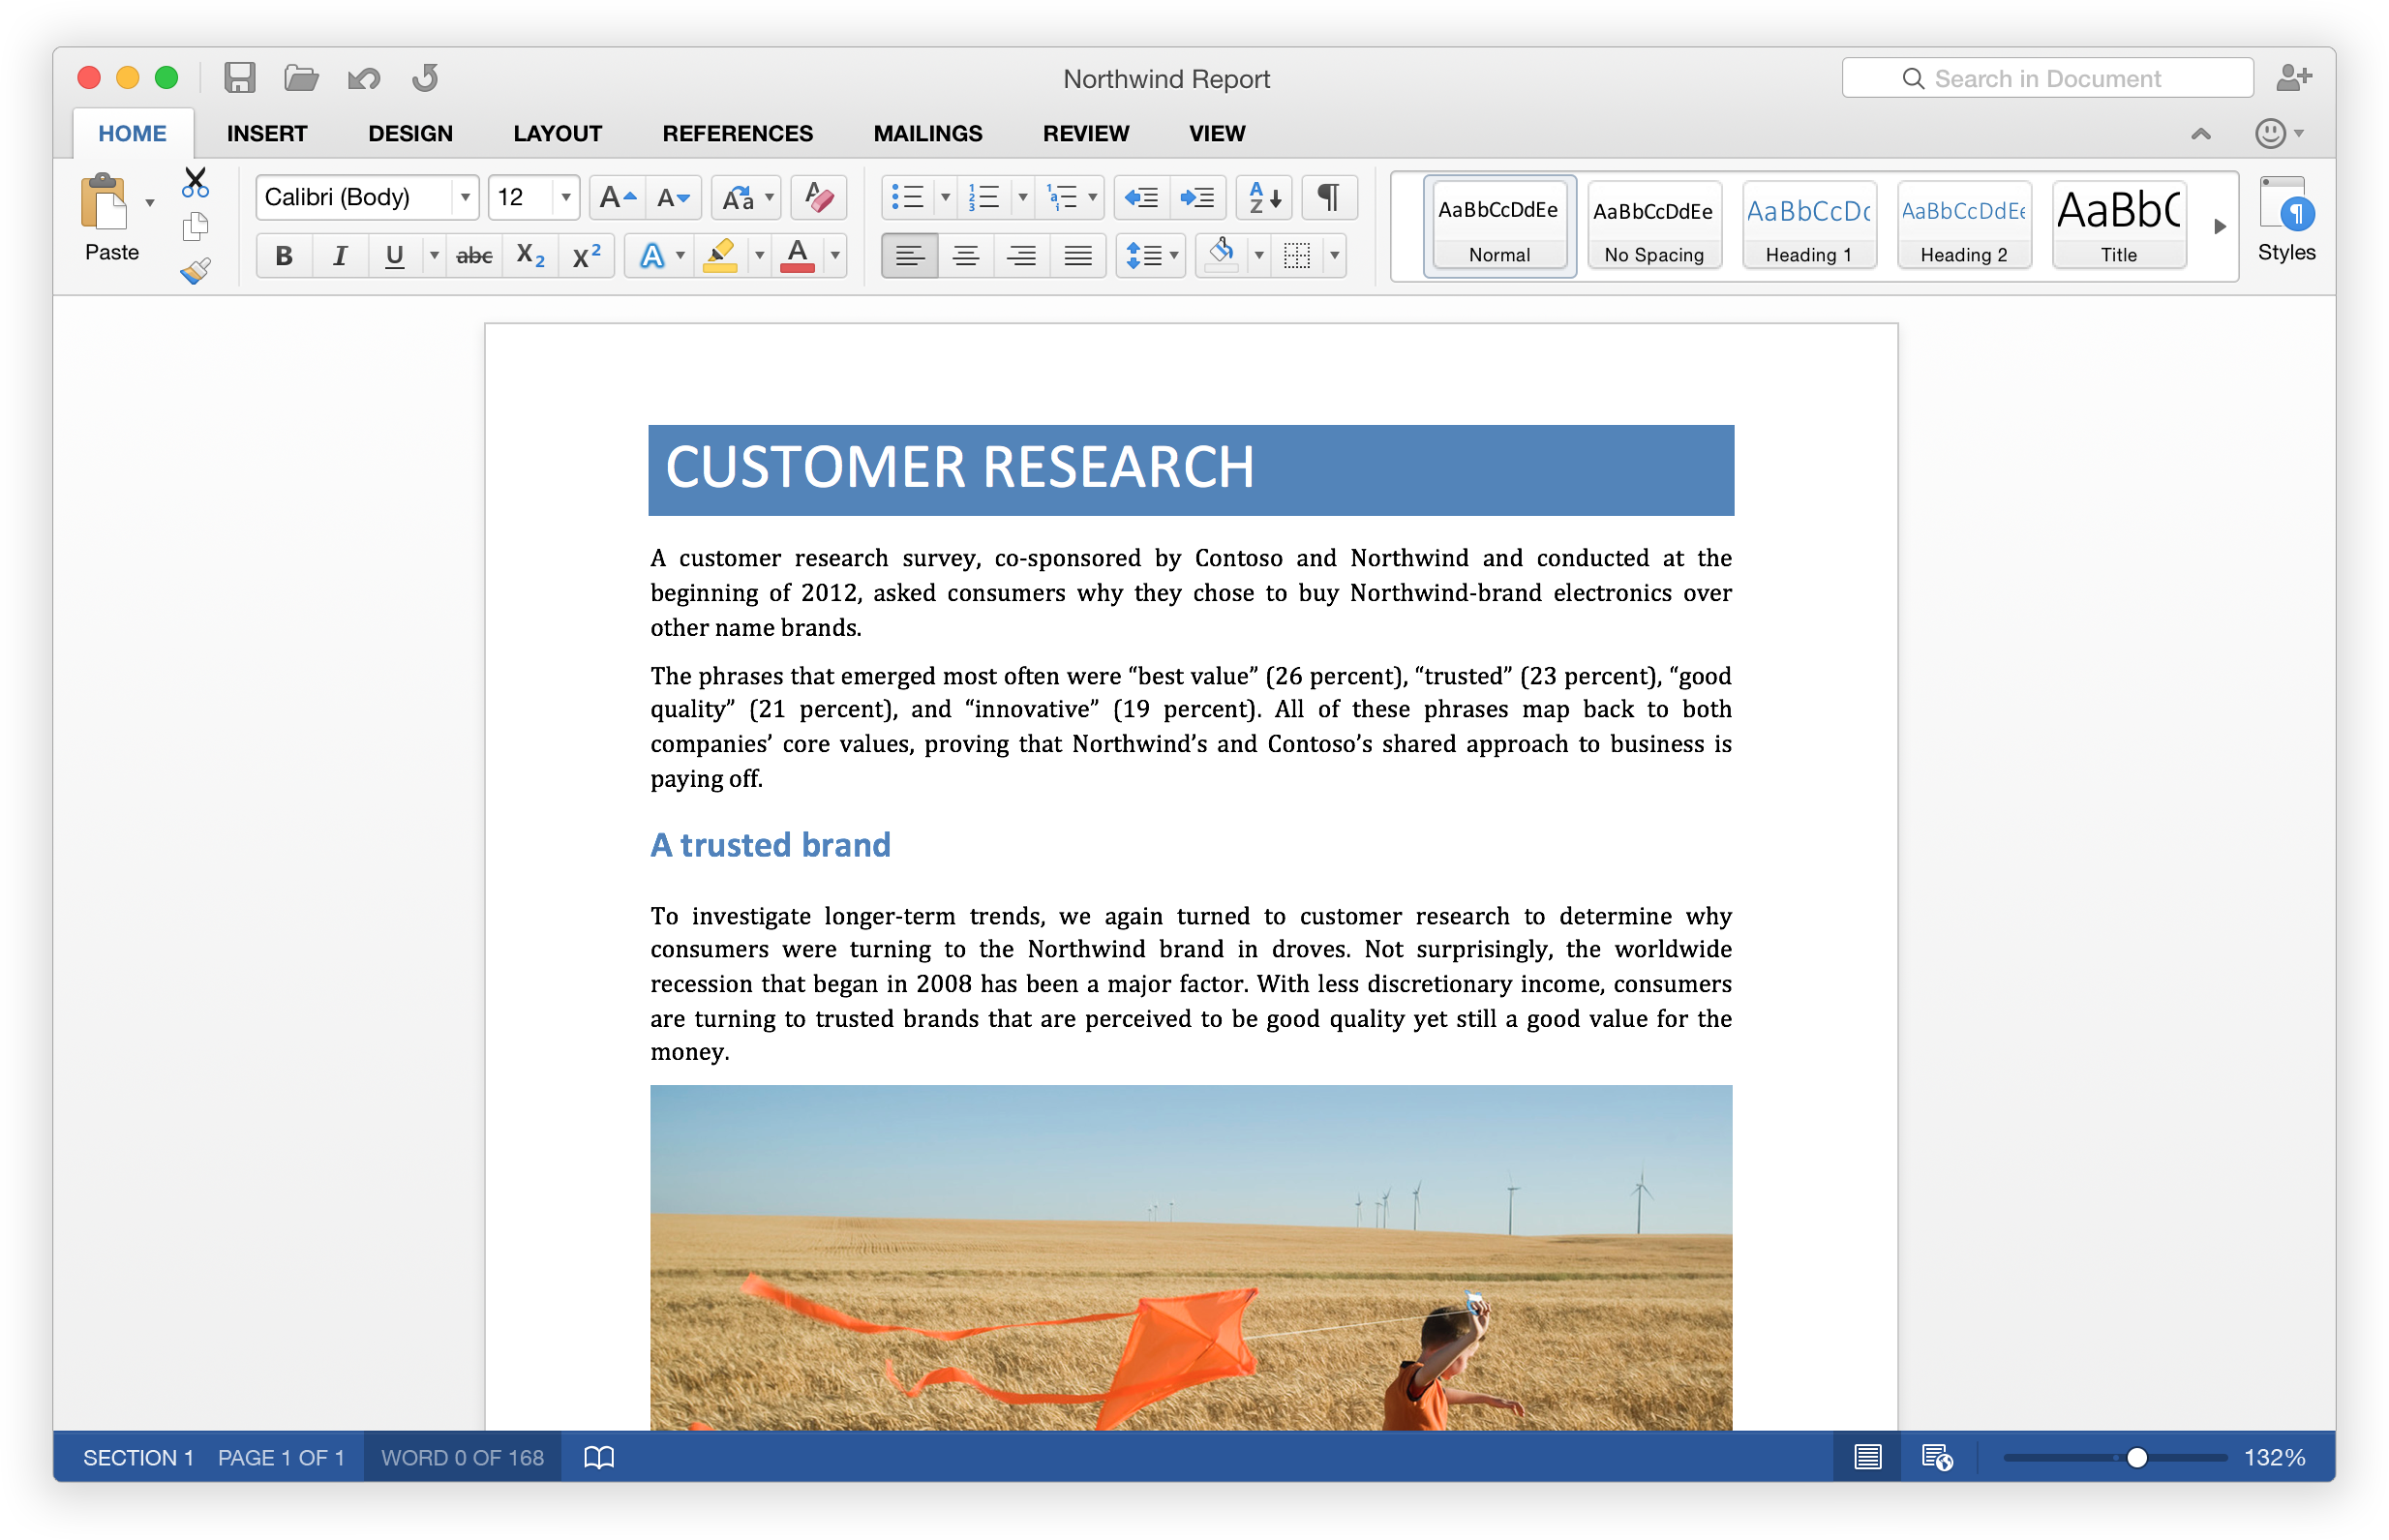 microsoft office 2016 for mac download